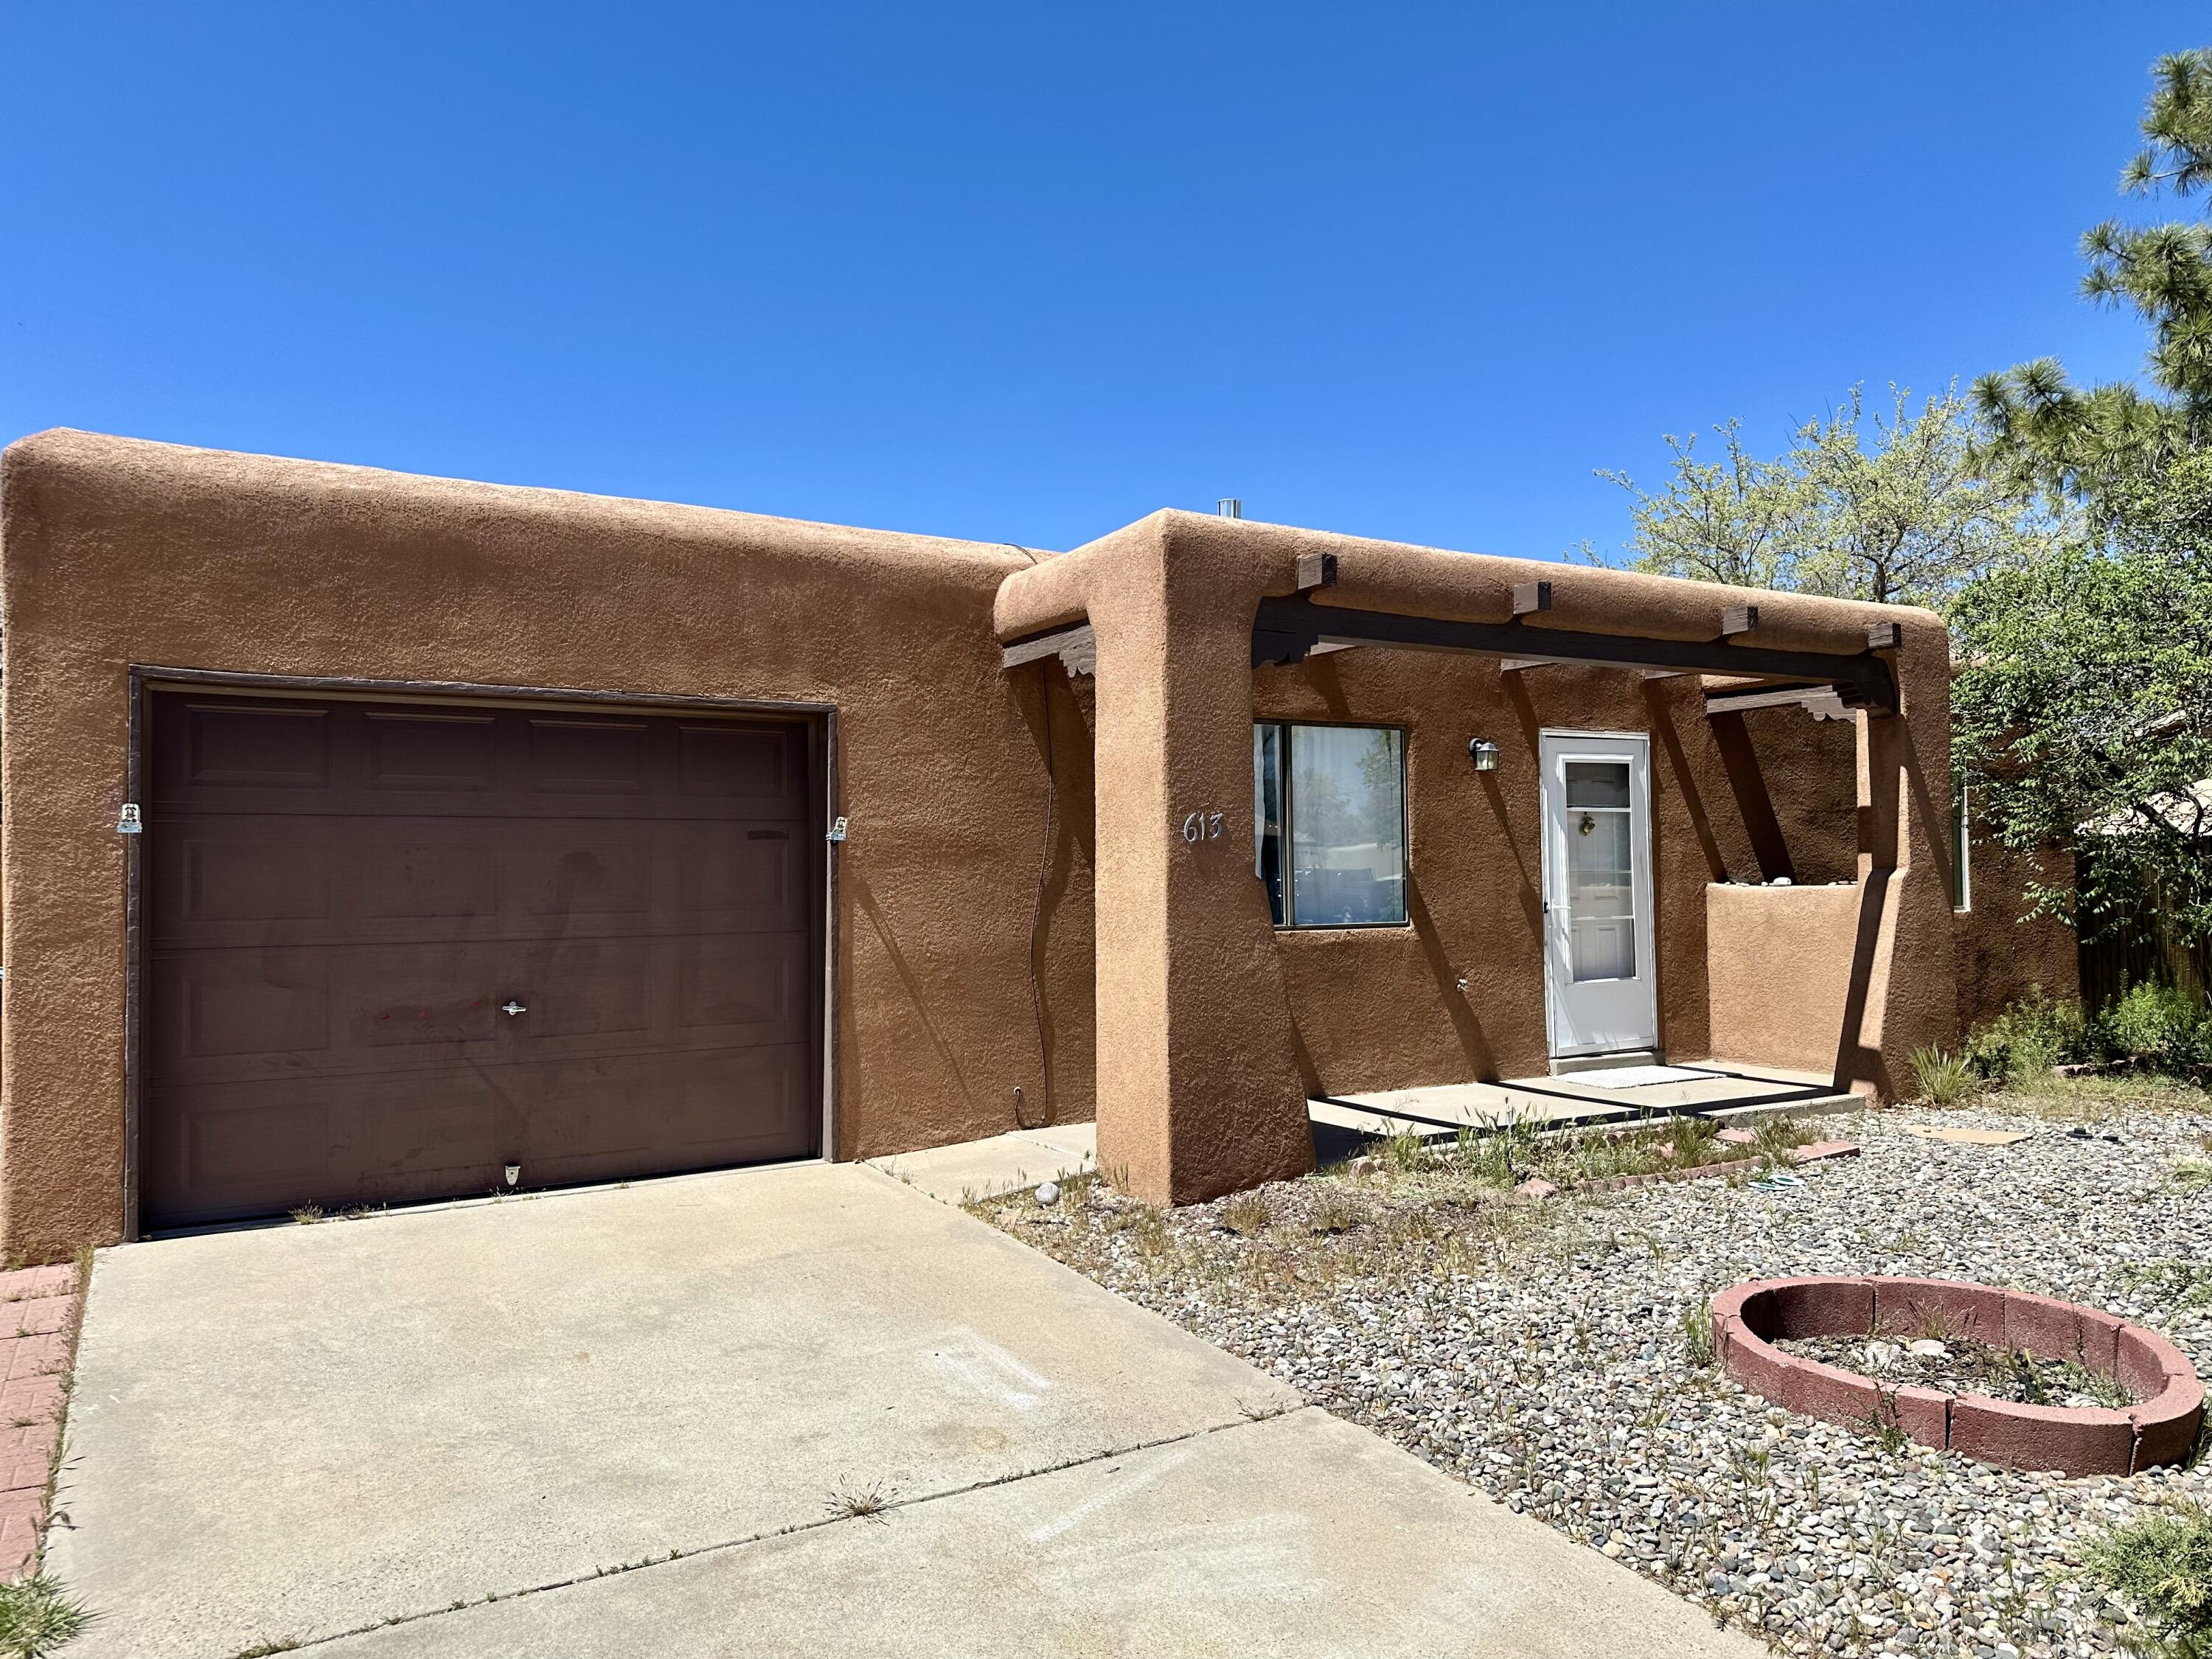 Come view this clean, updated home on a large quarter acre lot. New roof, new water heater, new furnace and new AC! Updated bathroom with custom tile a new vanity and fresh lighting. Great location in great school districts, close to shopping and more!